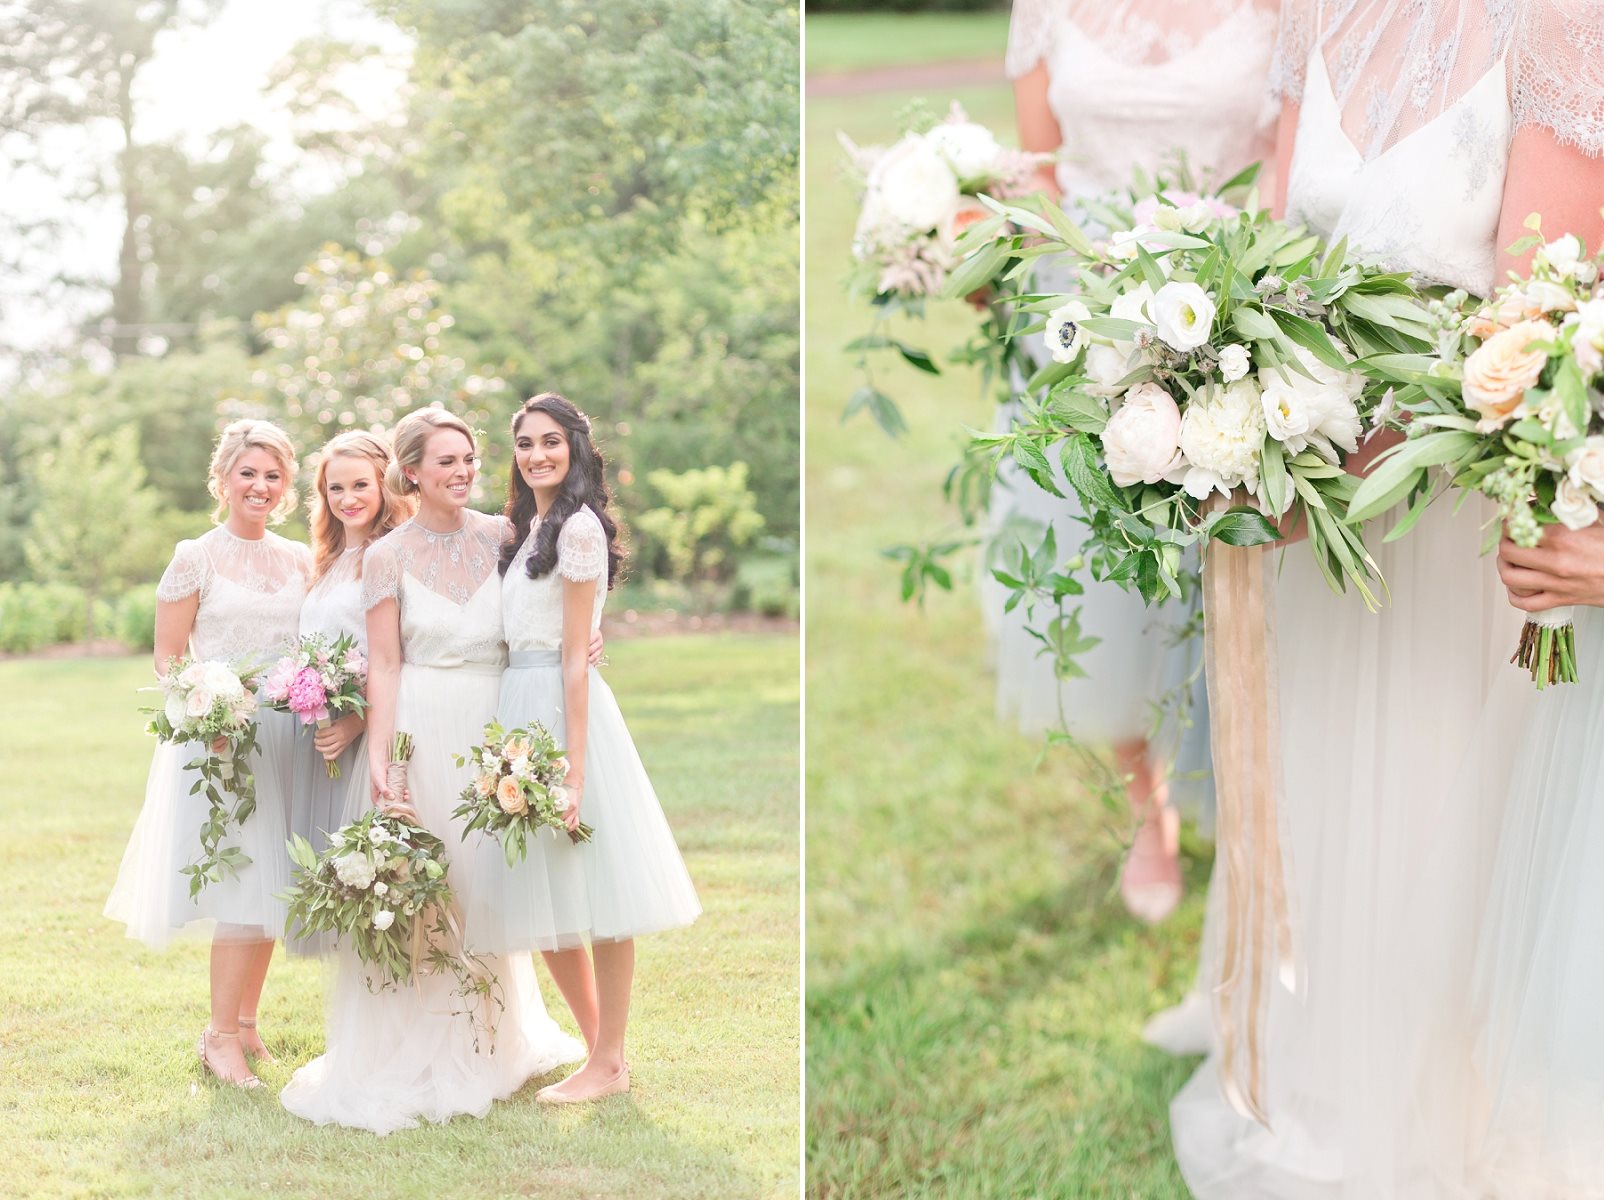 Pretty Bridesmaids Dresses & Bouquets - Pretty Spring Wedding Ideas in Soft Pastels and Rose Gold